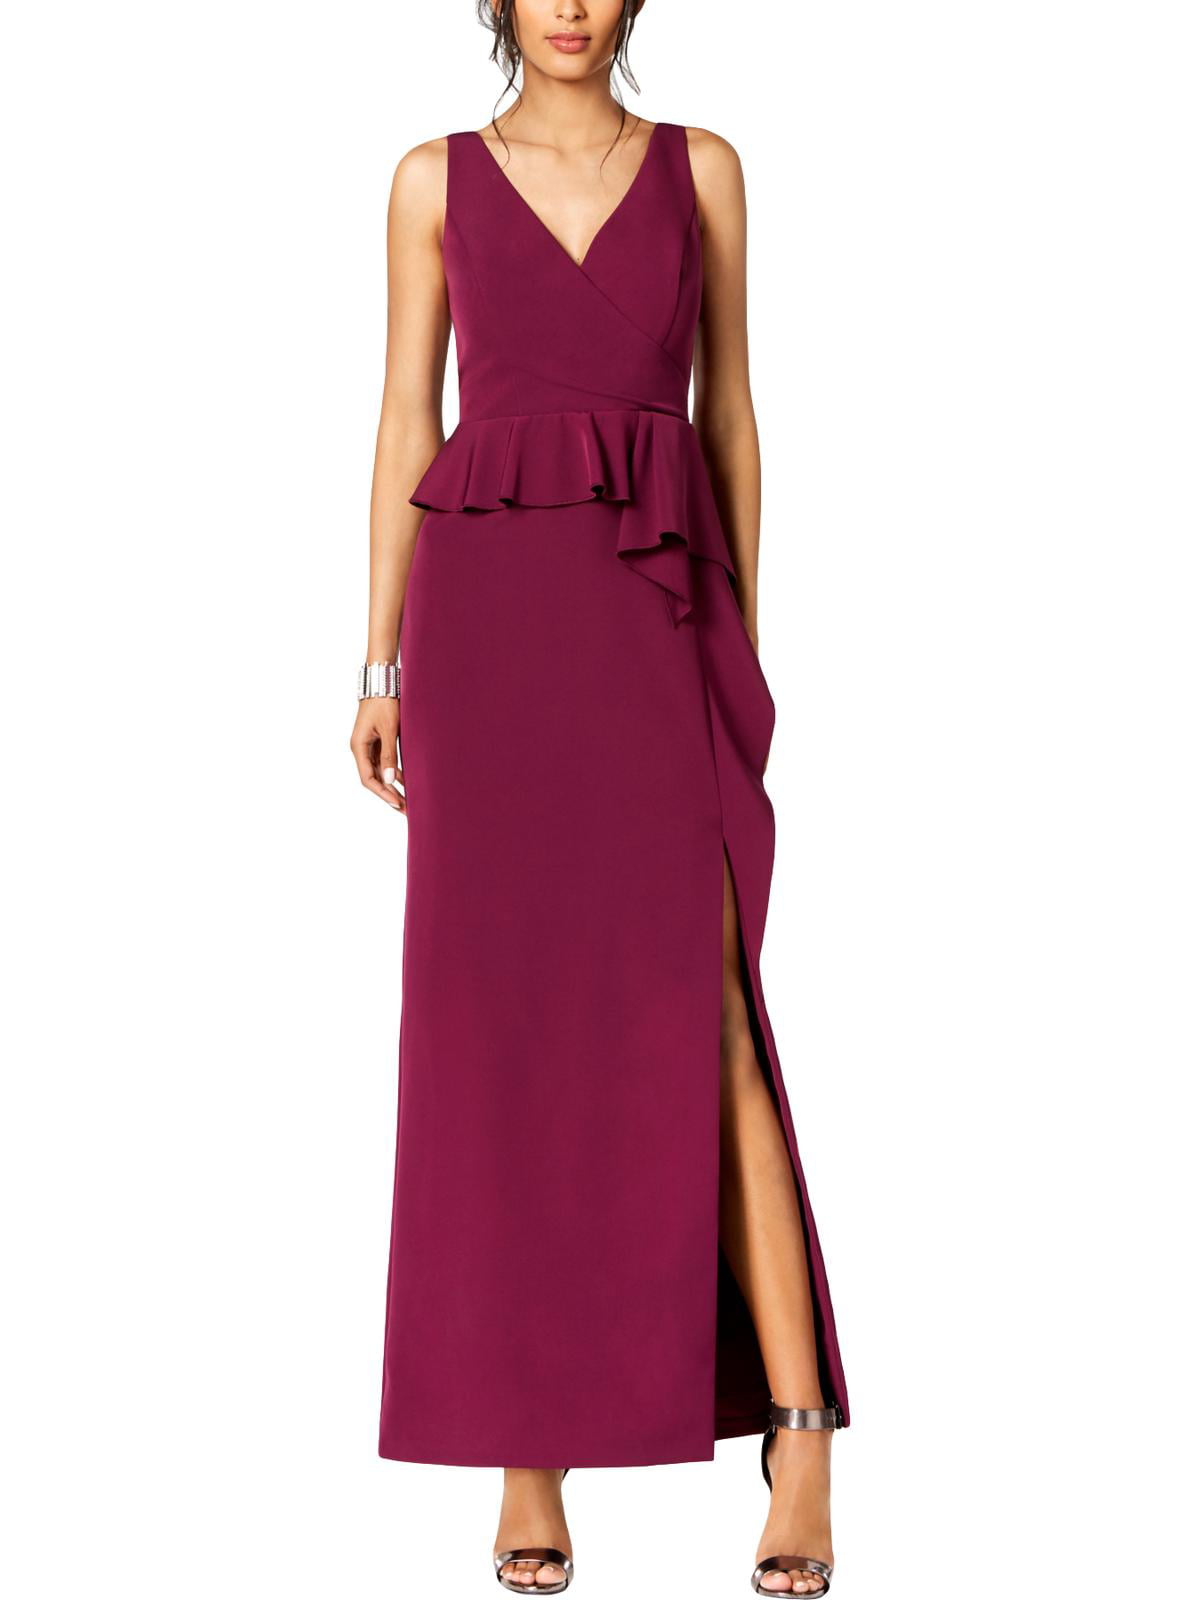 Vince Camuto - Vince Camuto Womens Evening Ruffle Formal Dress ...